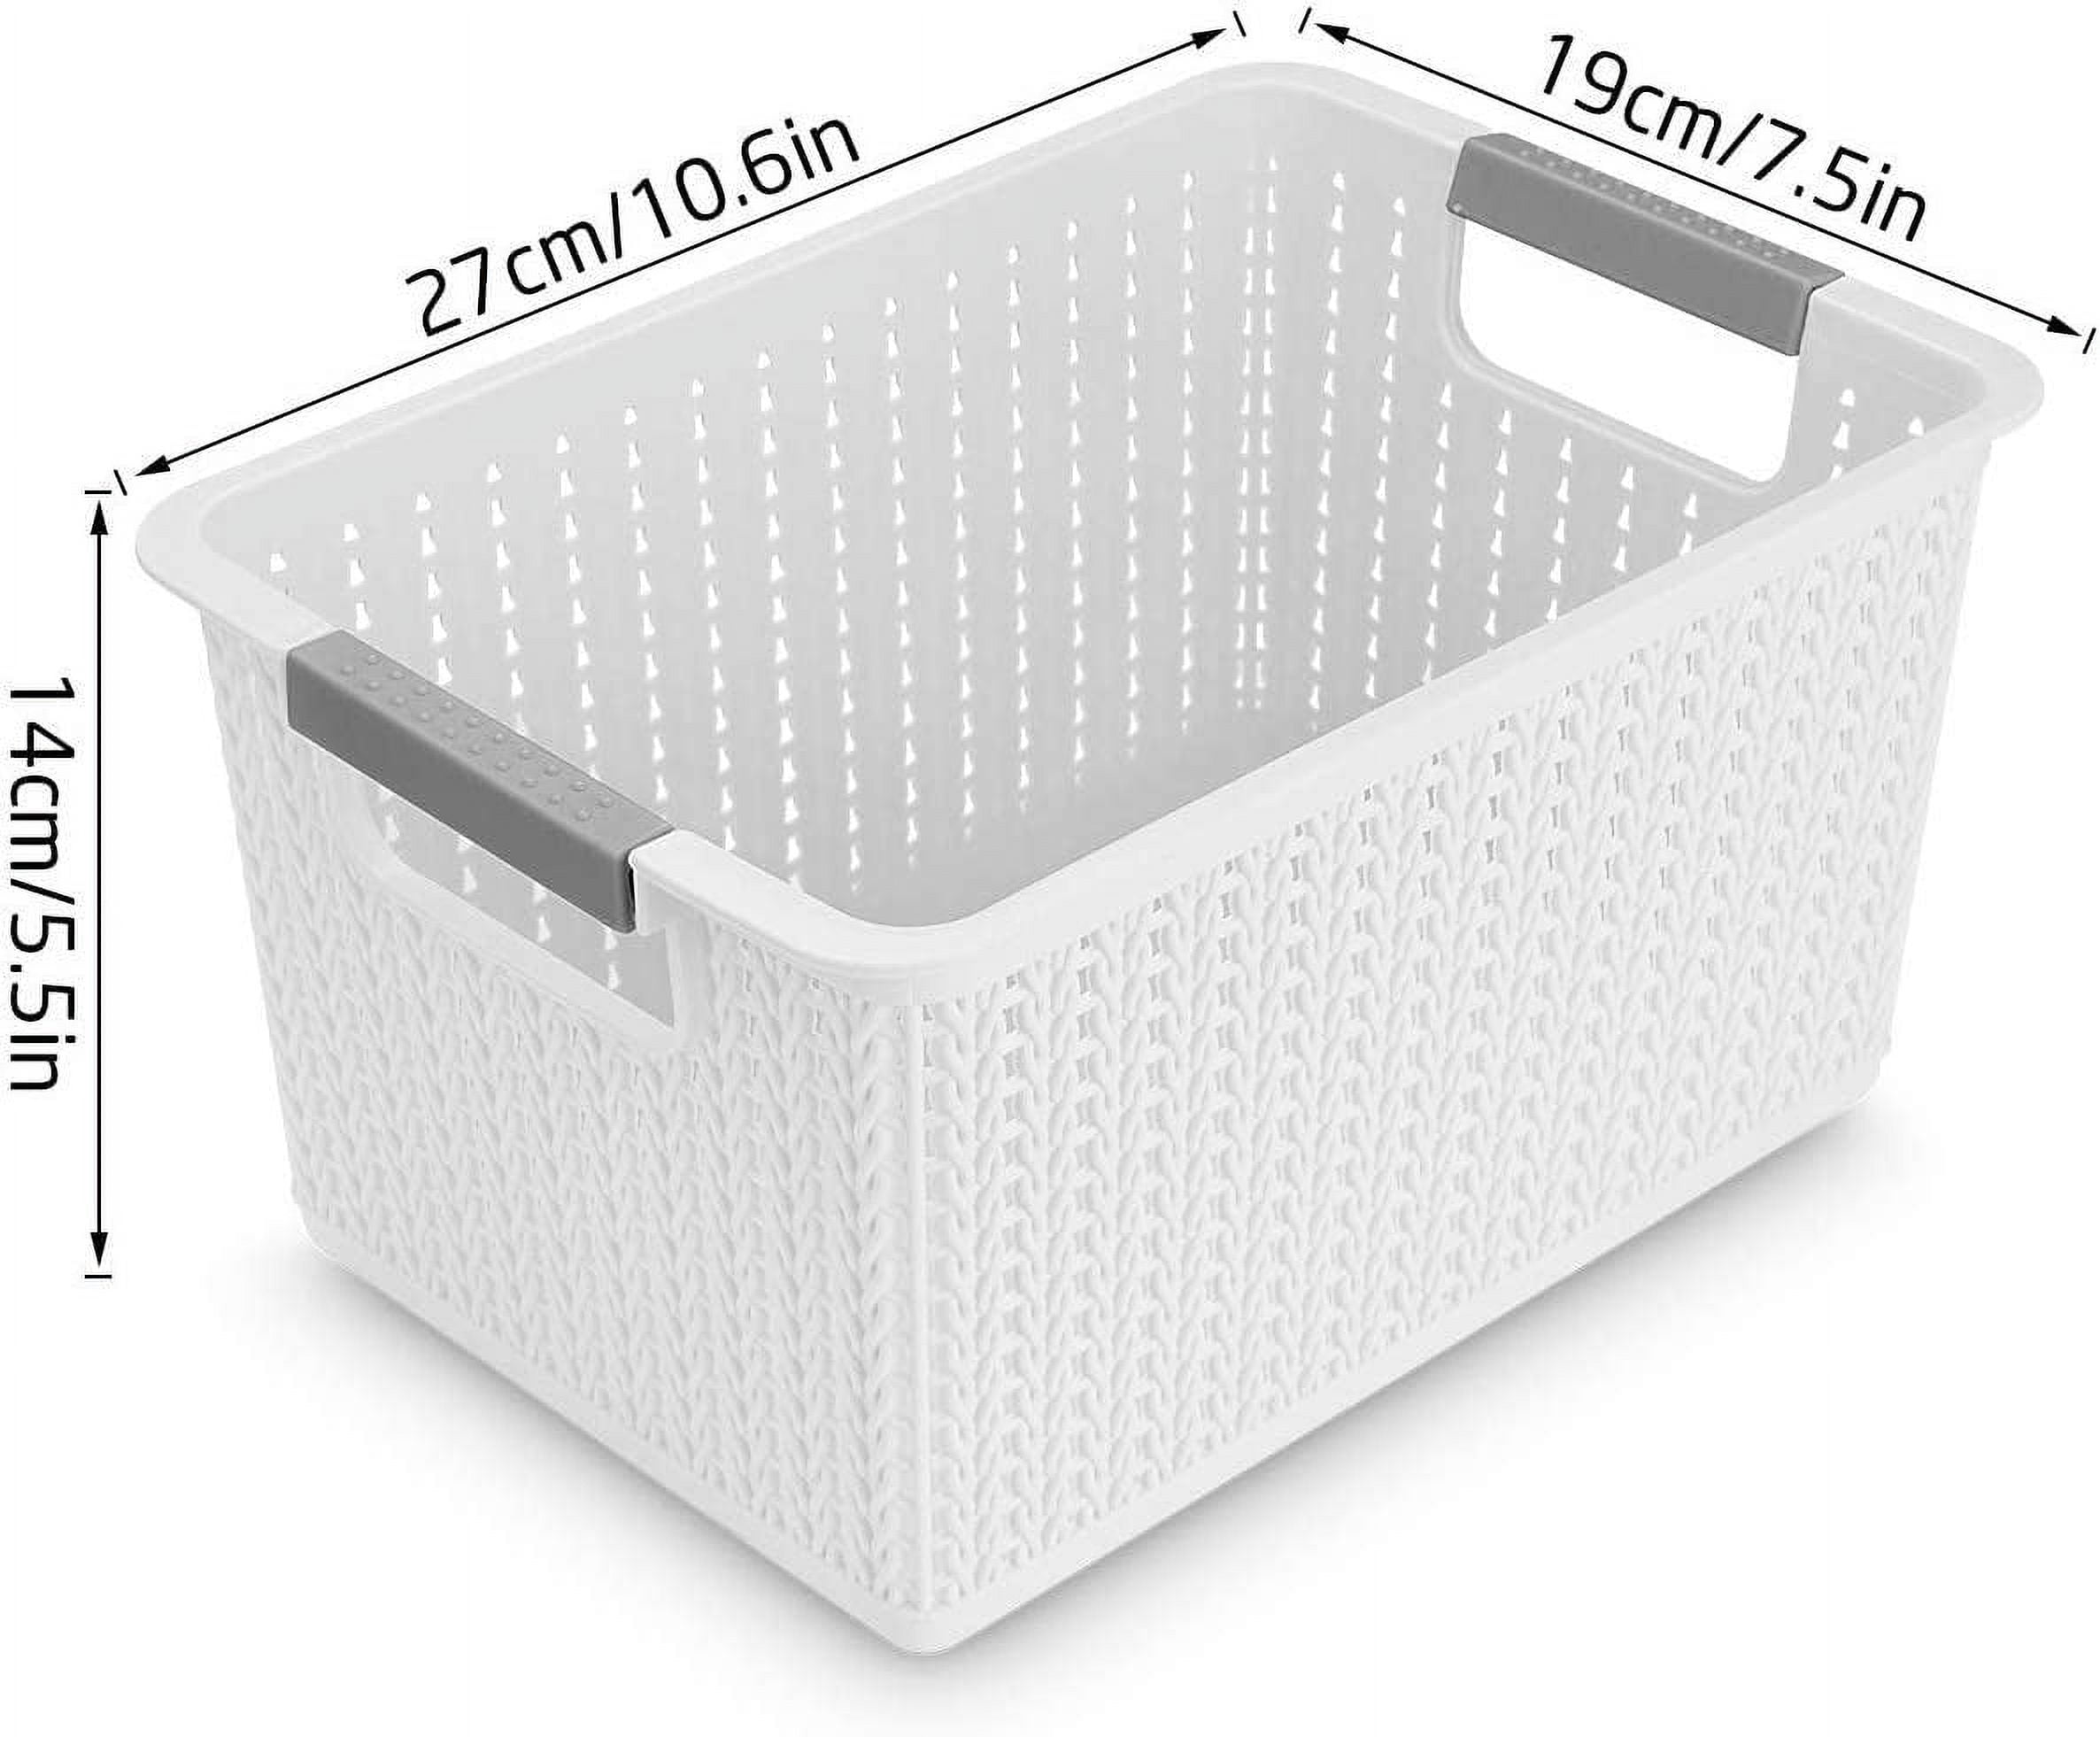 Jucoan 10 Pack Plastic Storage Basket, 10.5 x 7 x 3.5 Inch Colorful Plastic  Classroom Storage Organizer Tray Bin with Handles for Drawer, Closet